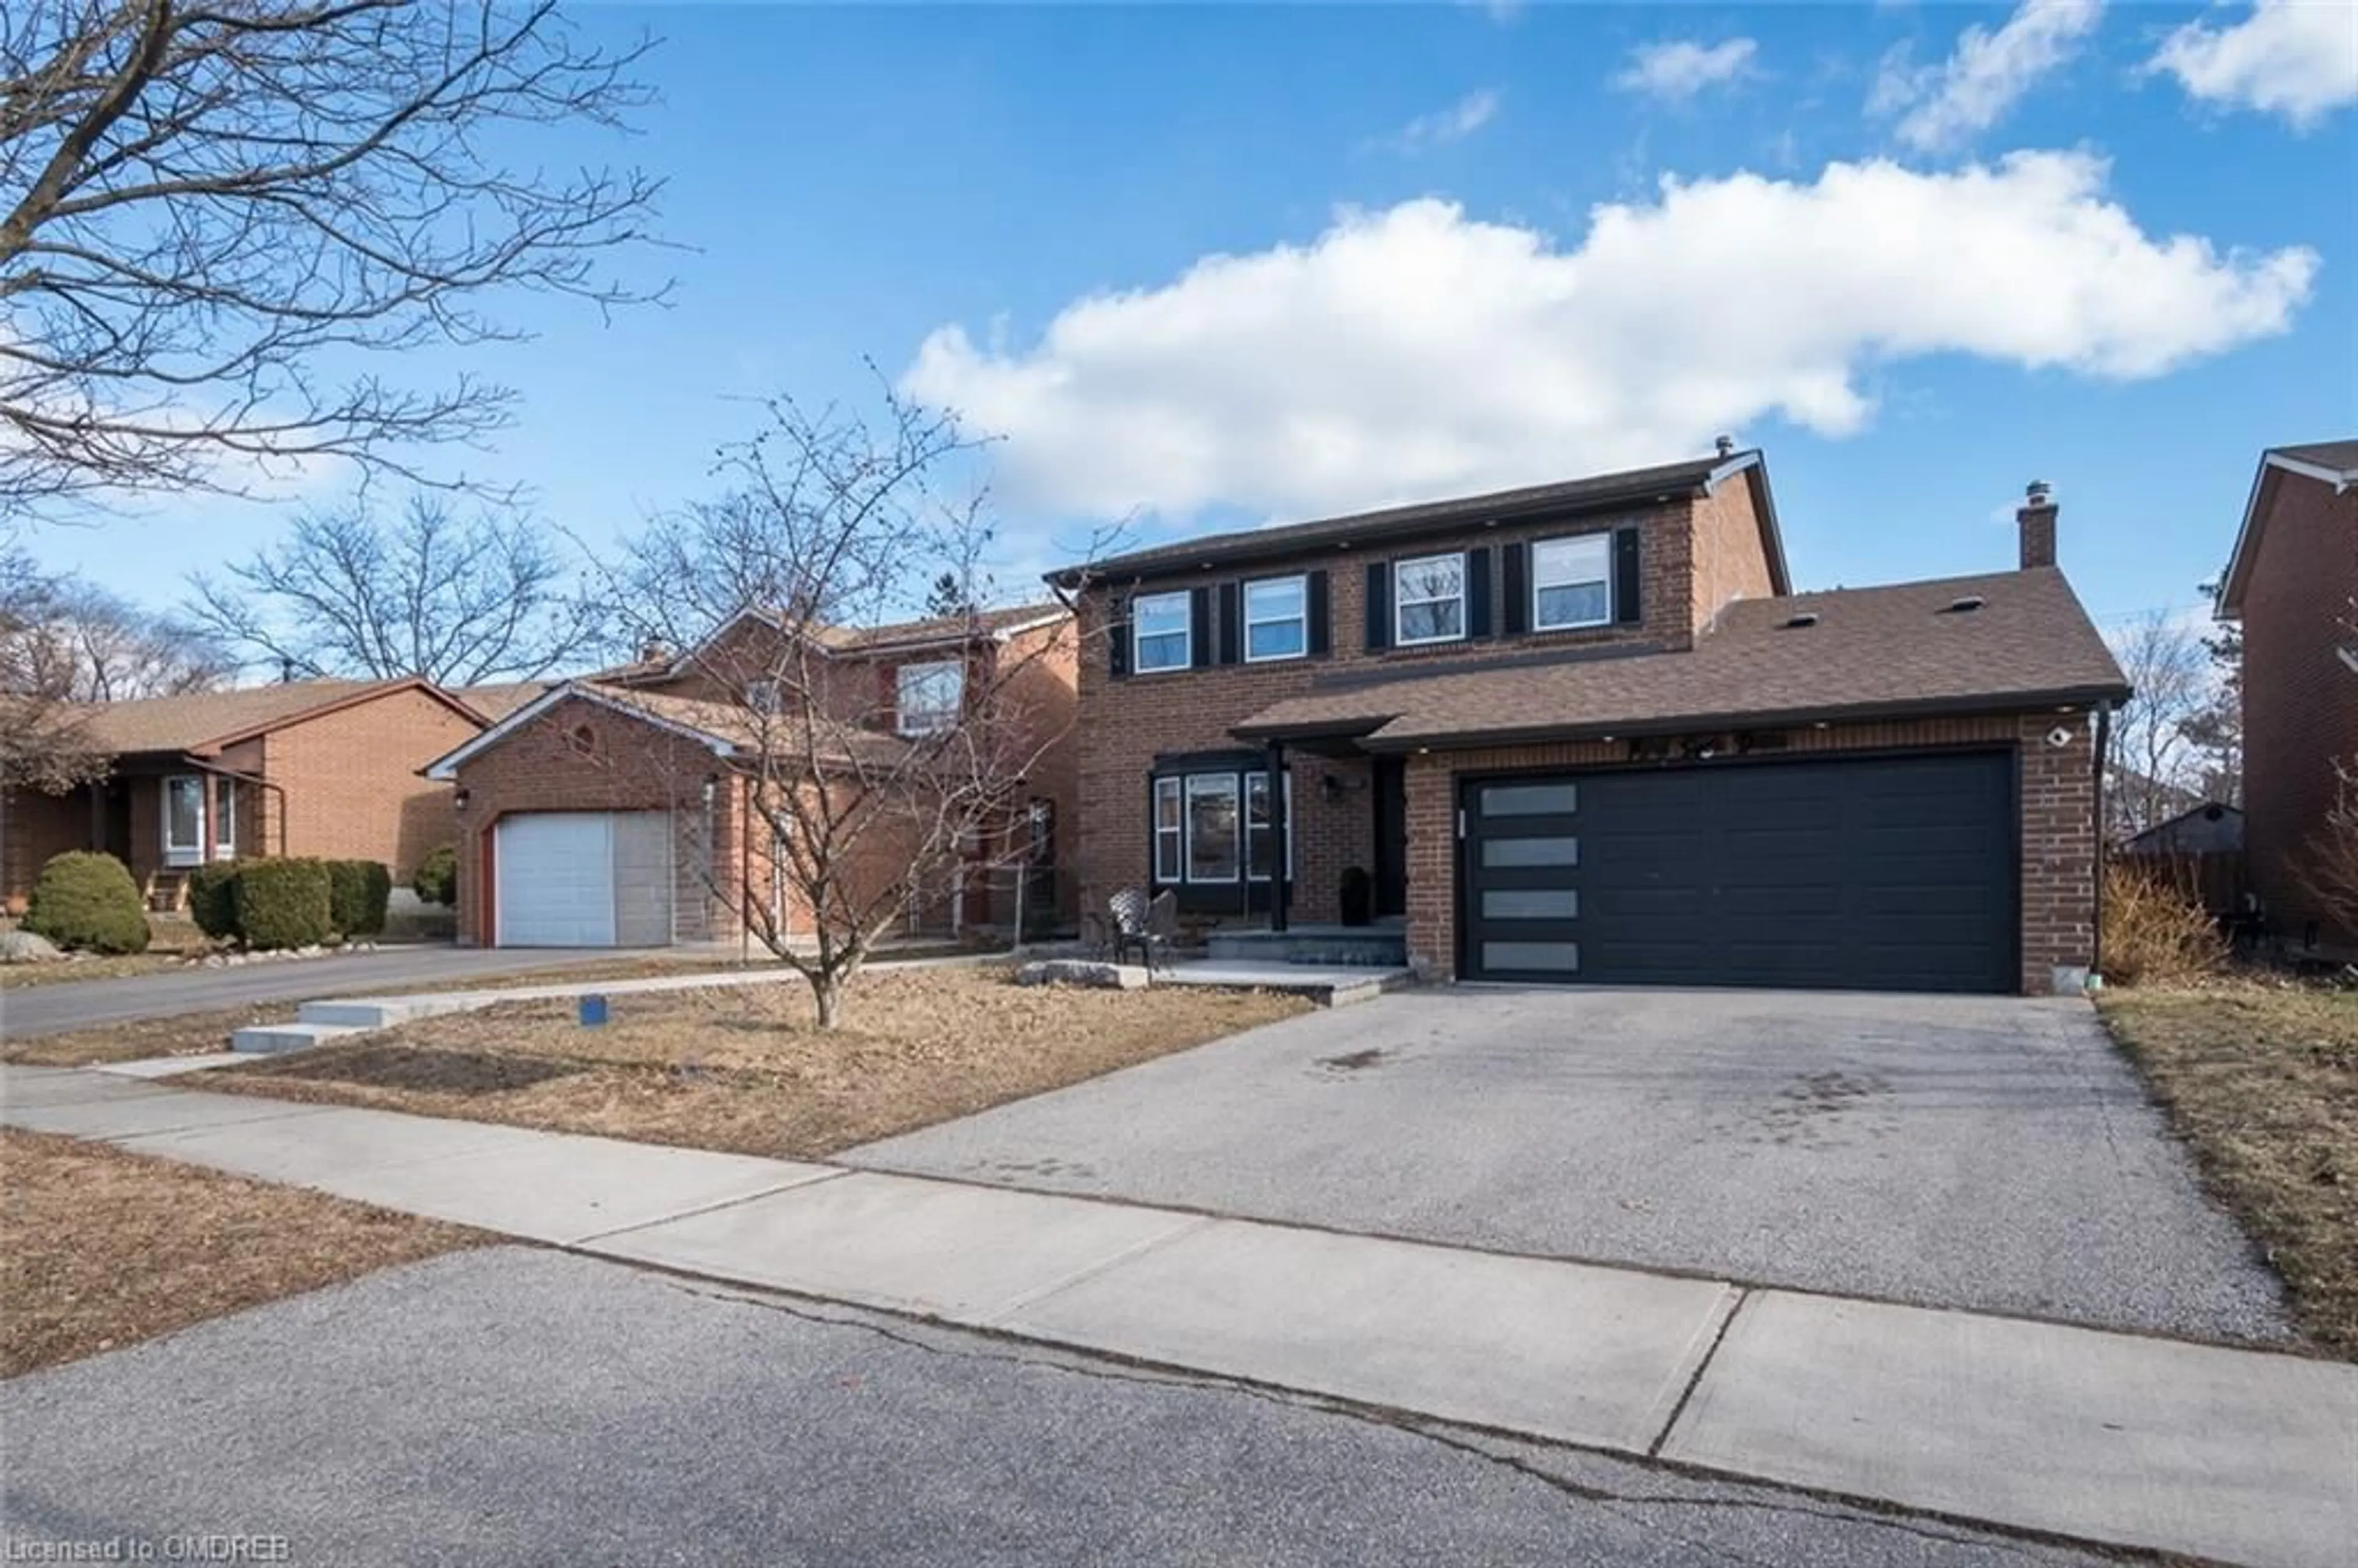 Home with brick exterior material for 774 Syer Dr, Milton Ontario L9T 4G2